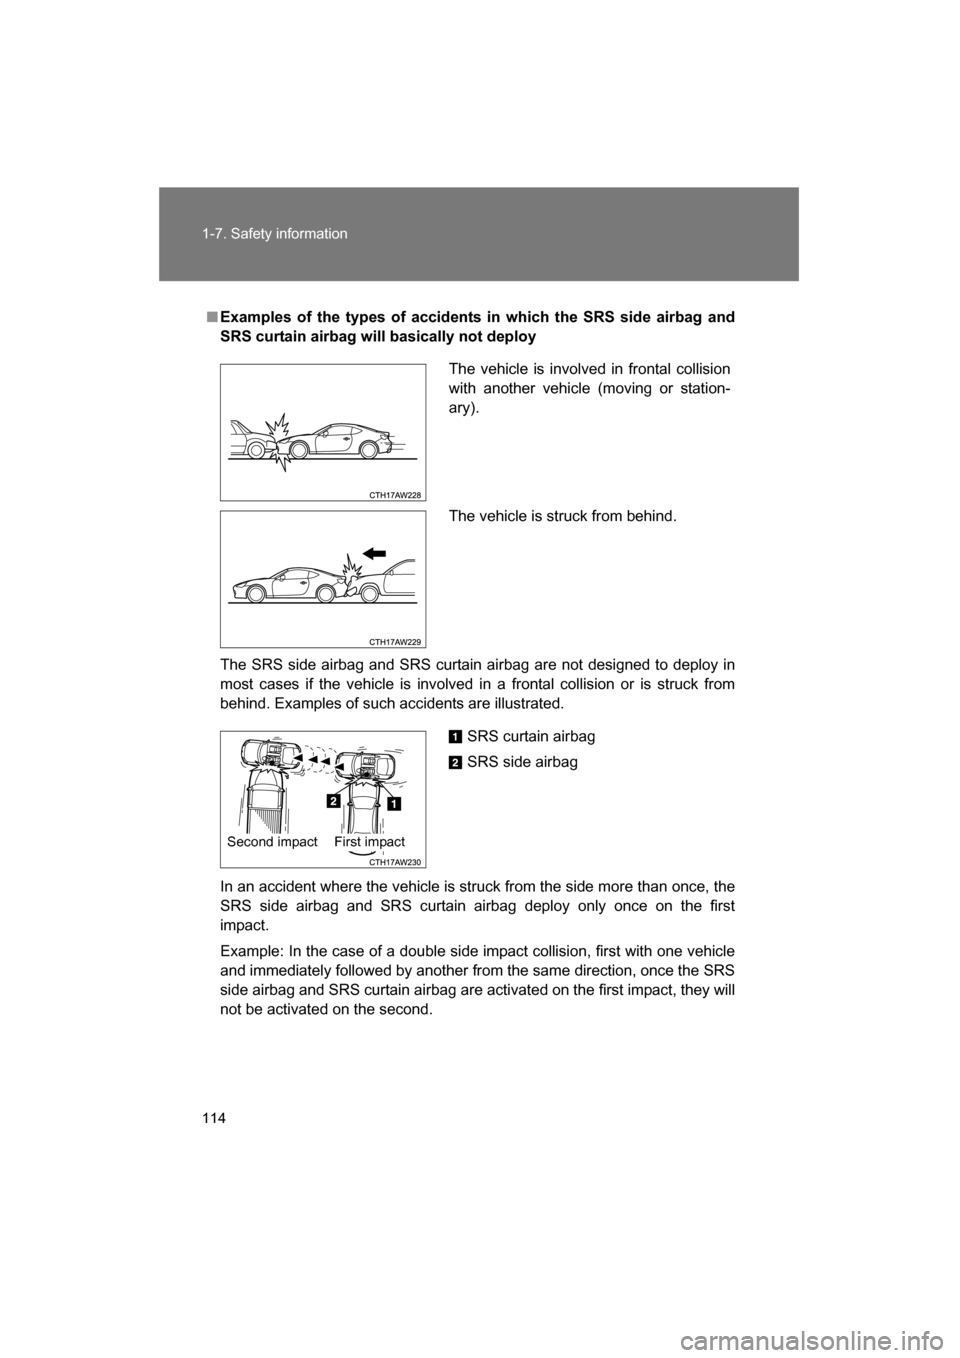 SUBARU BRZ 2015 1.G Owners Guide 114
1-7. Safety information
■Examples of the types of accidents in which the SRS side airbag and
SRS curtain airbag will basically not deploy 
The SRS side airbag and SRS curtain airbag are not desi